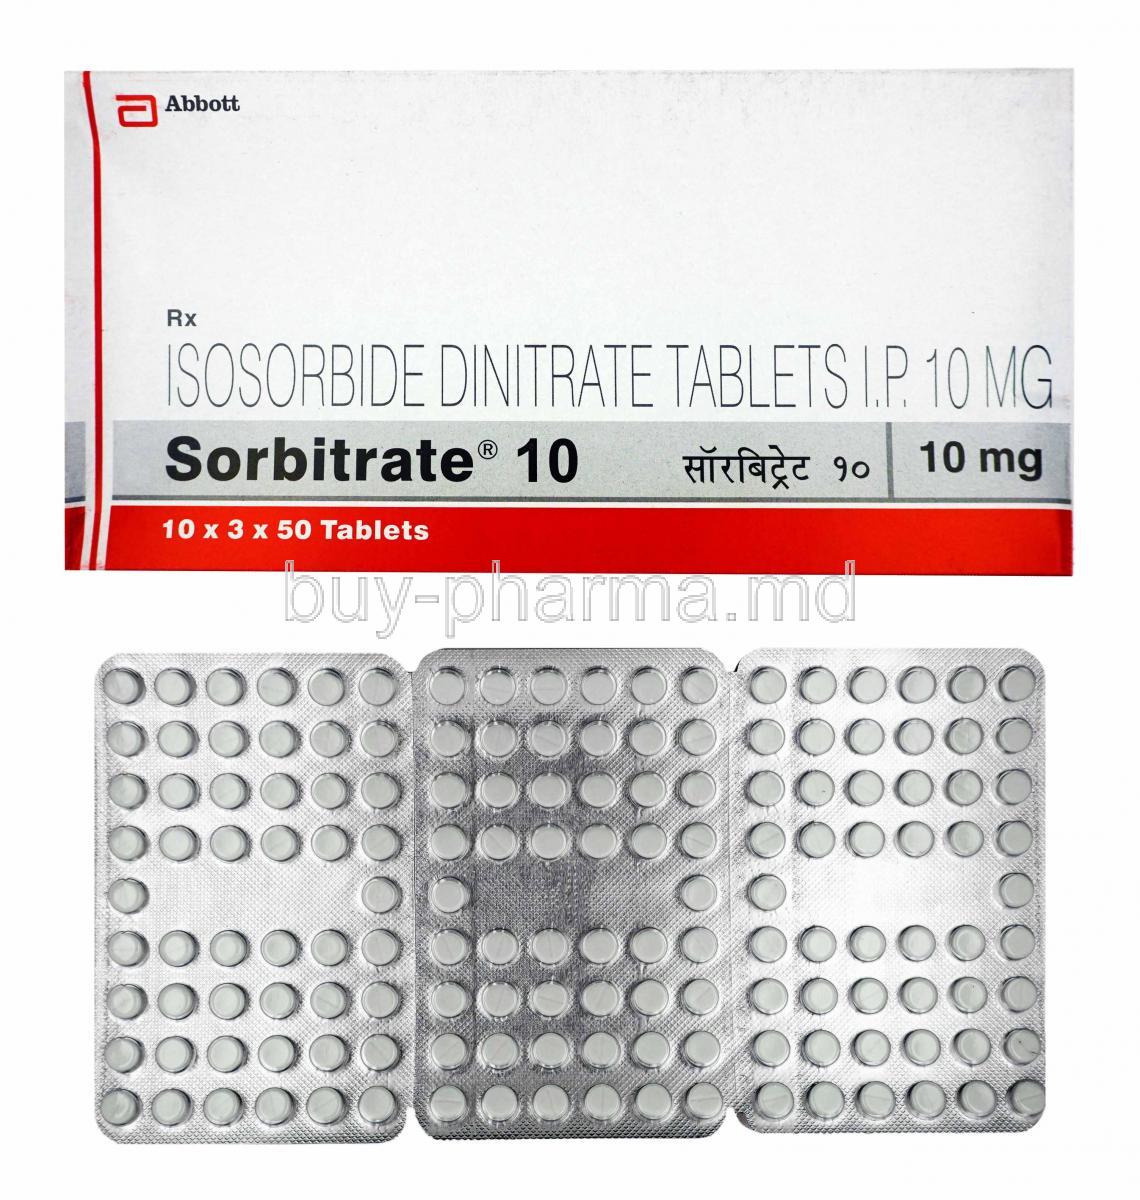 Sorbitrate, Isosorbide Dinitrate 10mg box and tablets